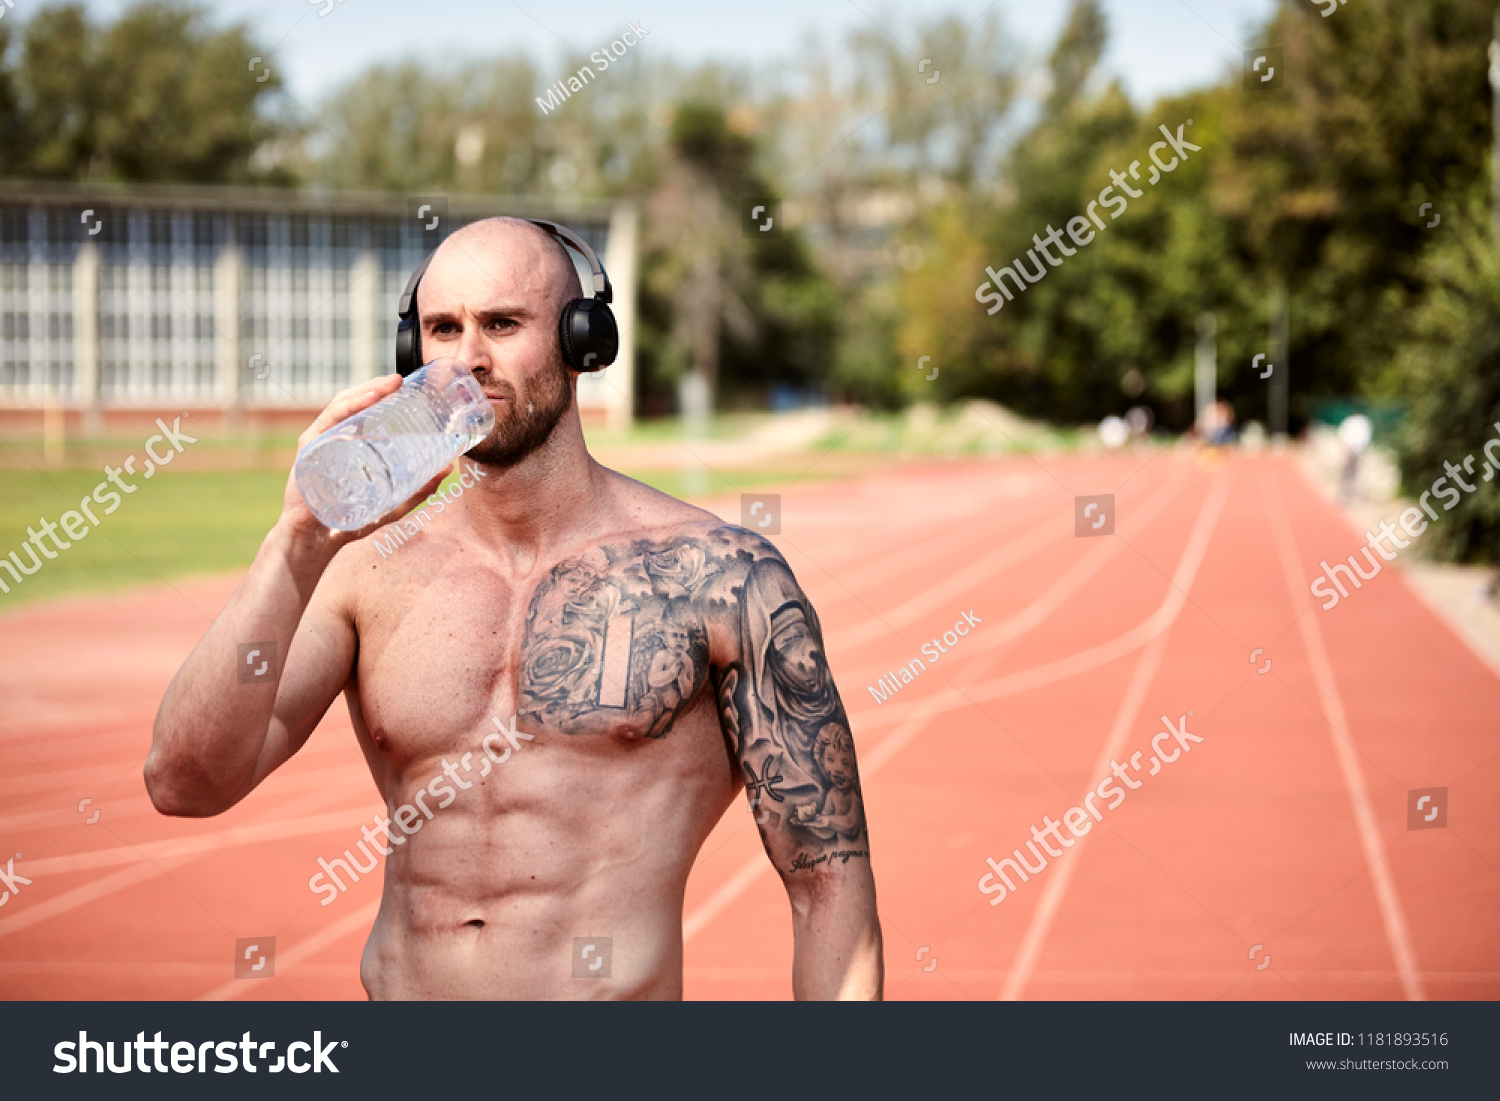 one young strong tattooed man shirtless barechestedness, bodybuilder, 30-35 years, drinking water from bottle. Outdoors, sports venue, running tracks (out of focus). upper body shot. #1181893516